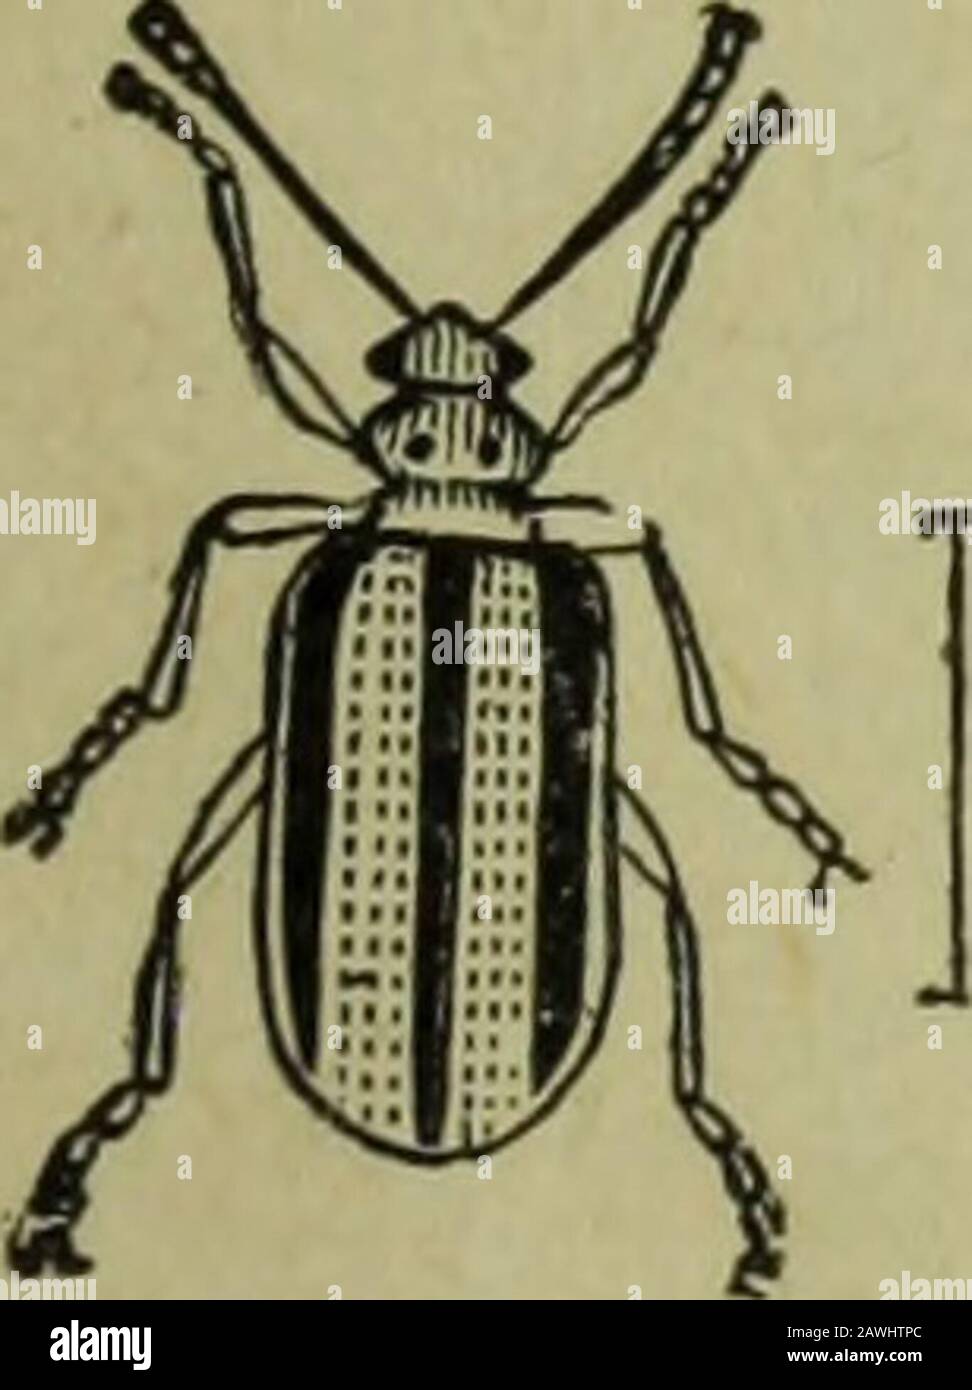 Annual report of the Fruit Growers' Association of Ontario, 1904 . Fig. 44. Leaf-horn beetle. flies, Tachina flies, Syrphus flies (Fig. 50) and cheese flies. The Tachina andSyrphus flies are very beneficial. The Hemiptera or Bugs are divided into the True-bugs (Fig. 51), theLeaf-hoppers and Plant, lice (Fig. 52) and Lice. Nearly all are injurious,and frequently do much injury. They suck the juices from plants.. Fig. 45. Plant-eater beetle. Stock Photo